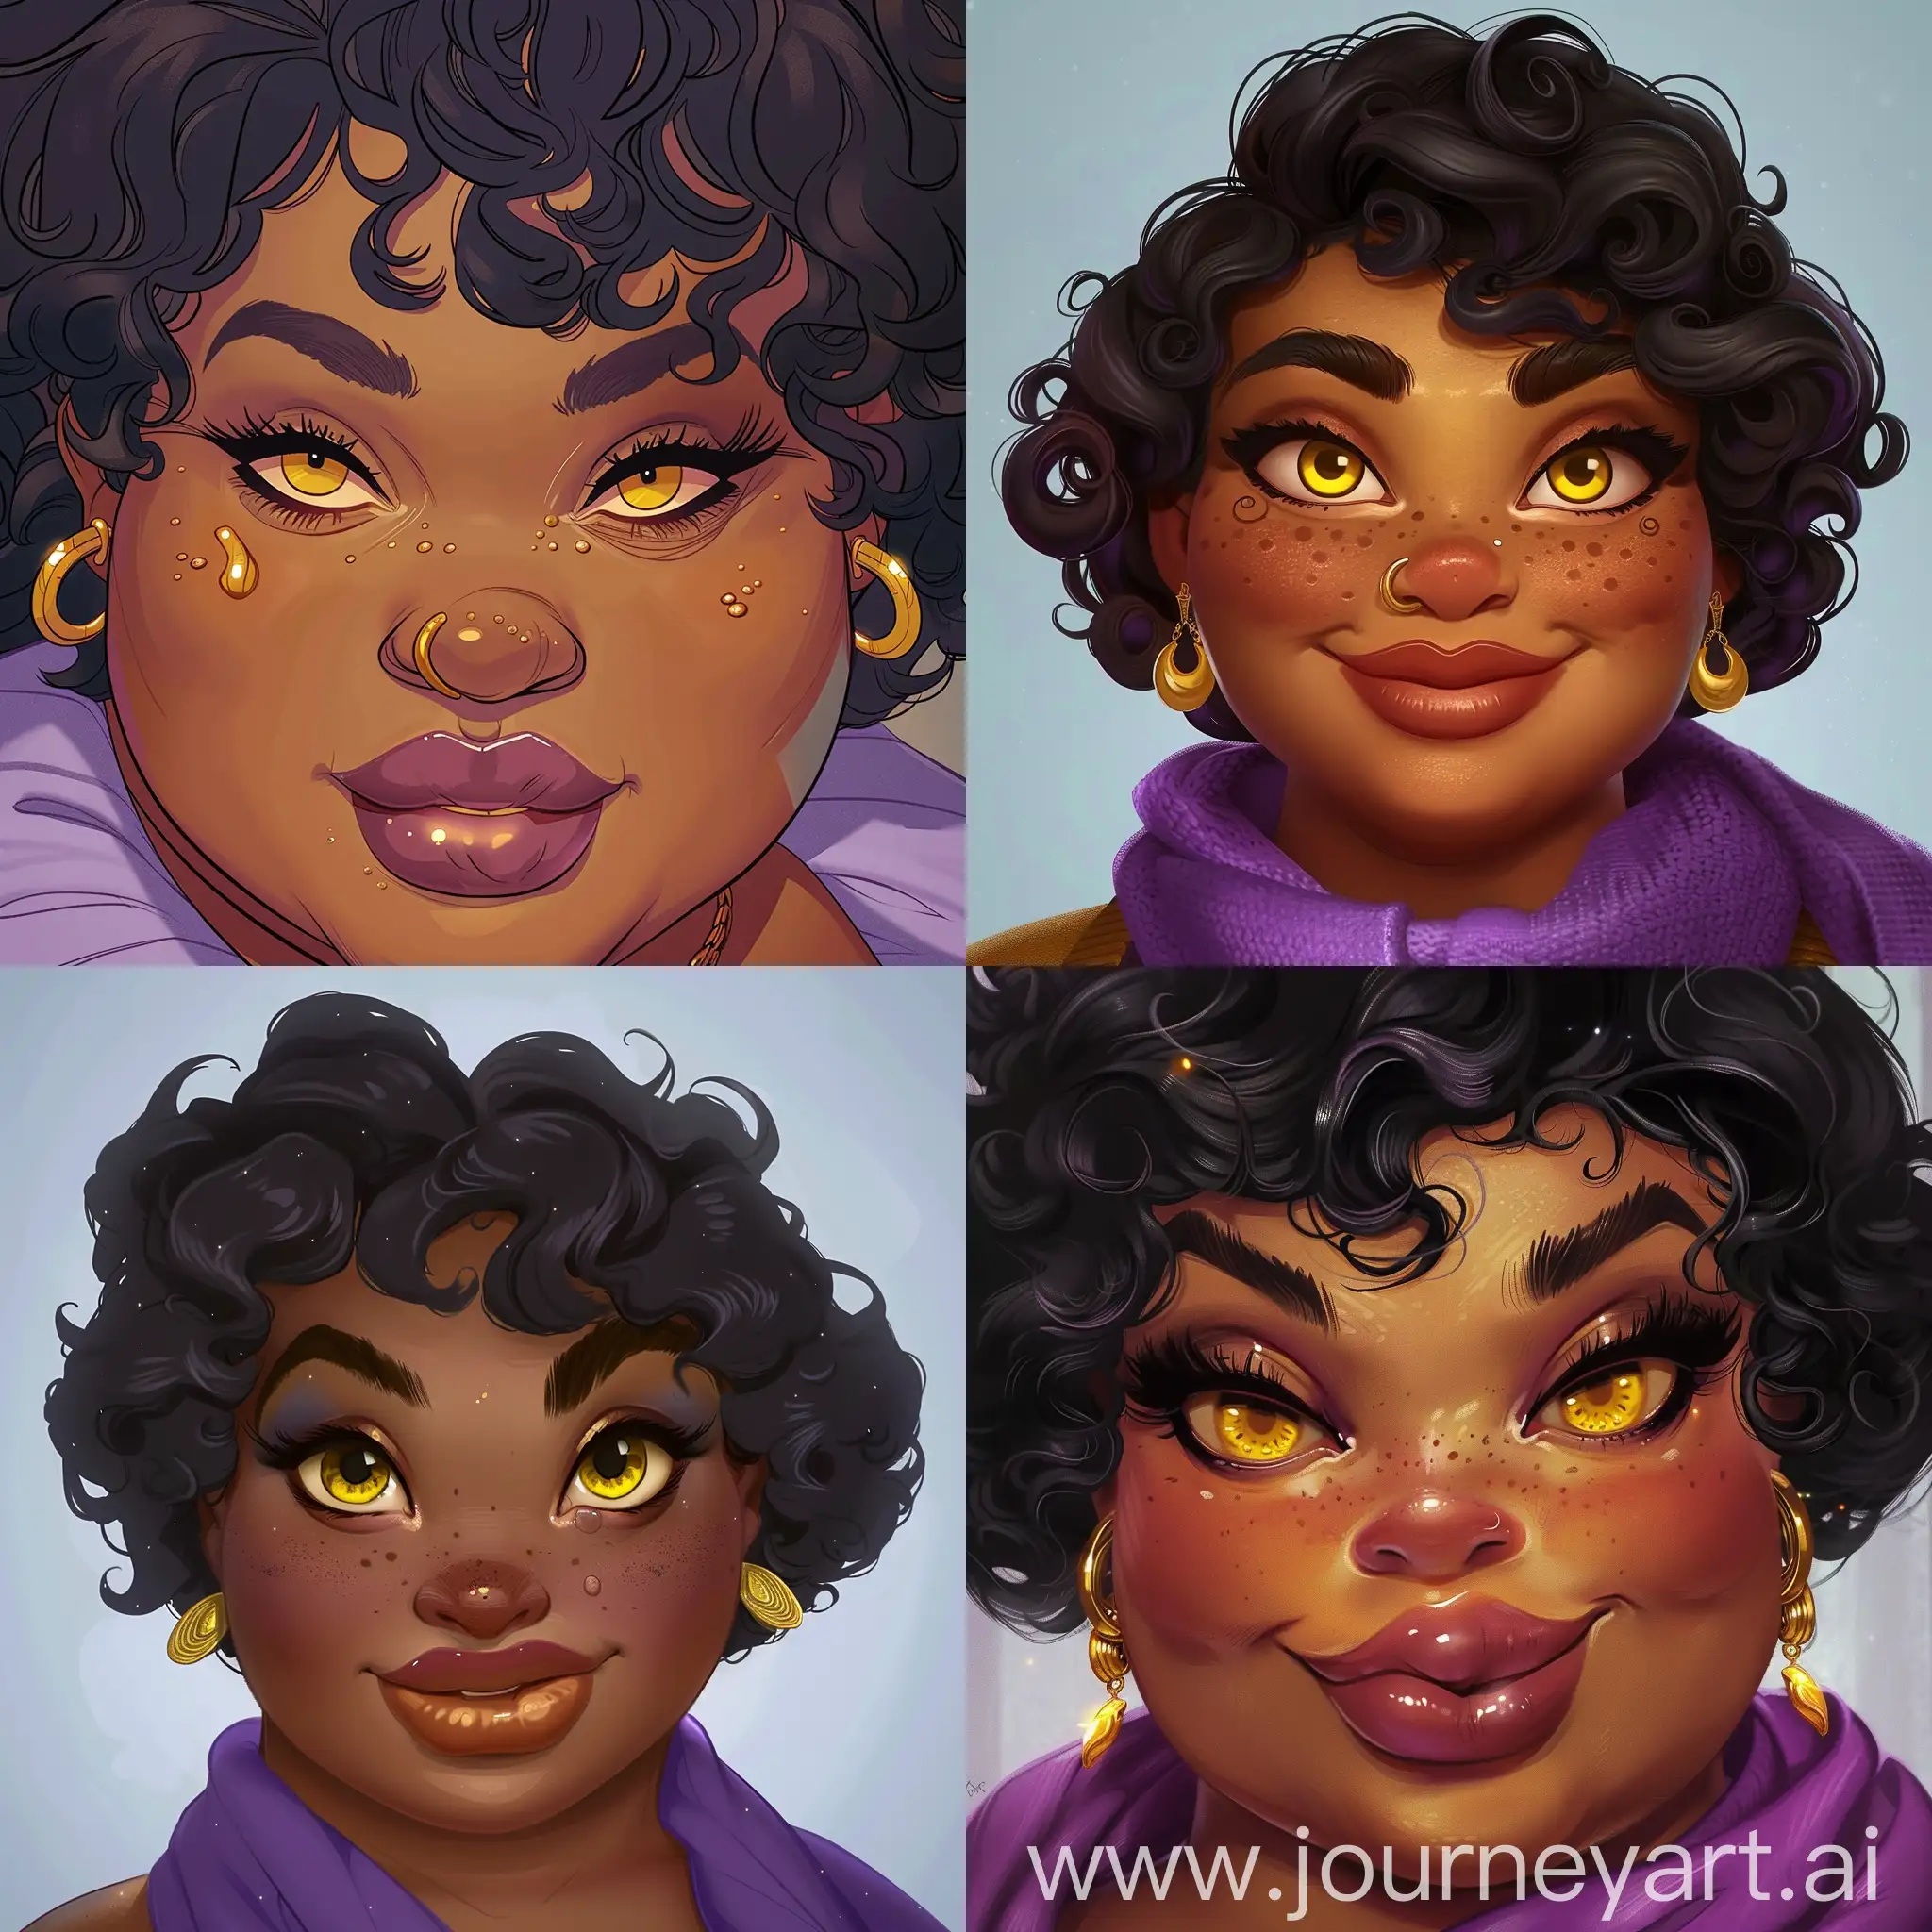 Vibrant-90s-Disney-Cartoon-Inspired-Portrait-of-a-Stylish-CurlyHaired-Woman-with-Gold-Earrings